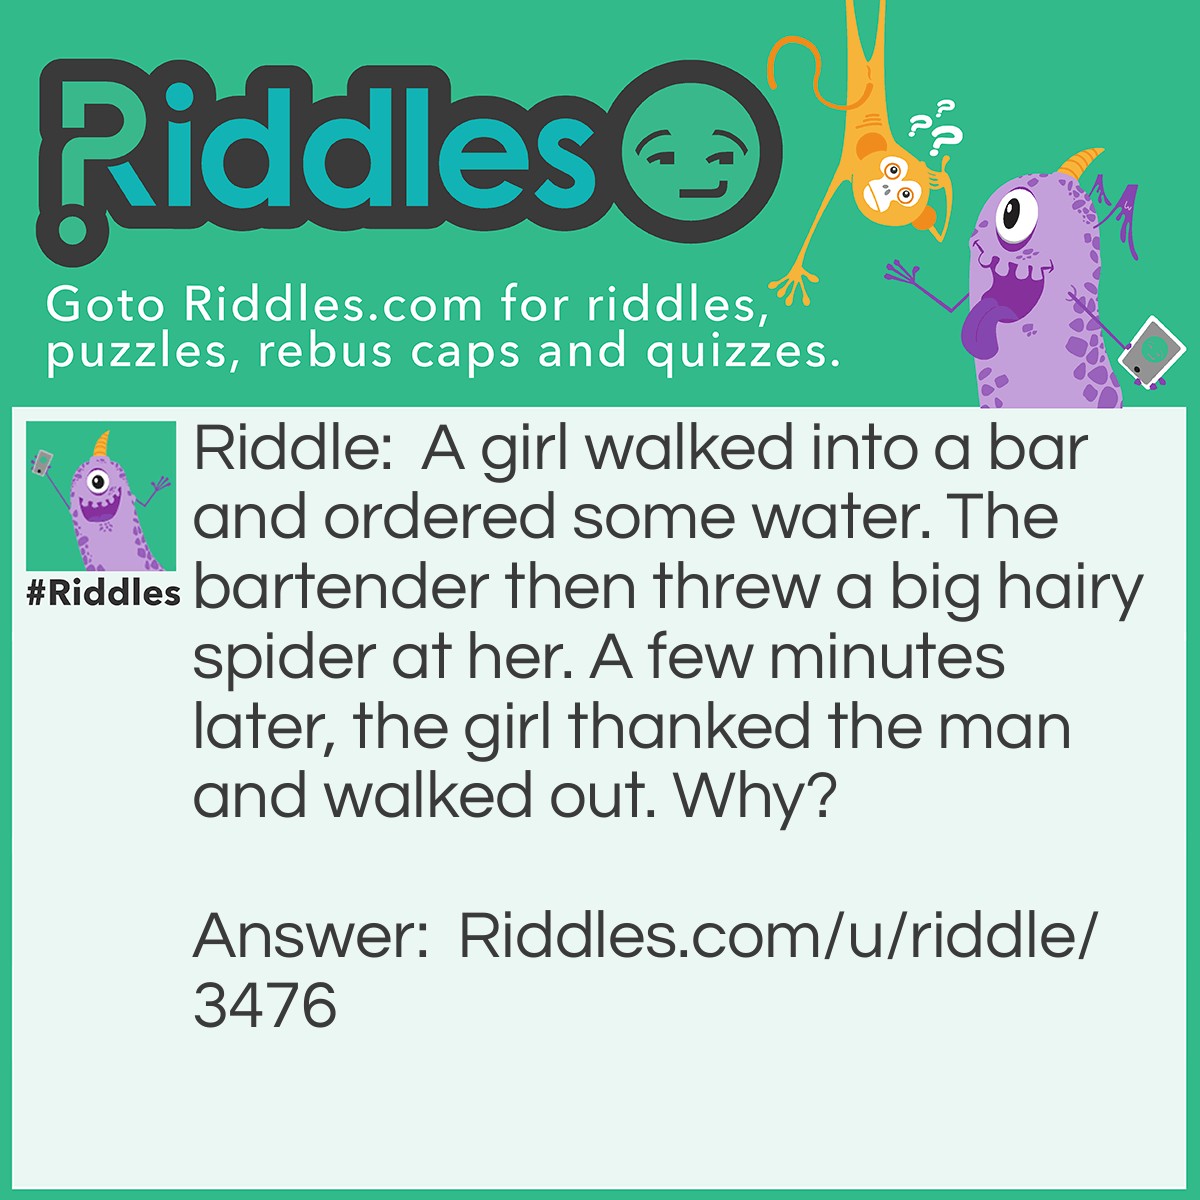 Riddle: A girl walked into a bar and ordered some water. The bartender then threw a big hairy spider at her. A few minutes later, the girl thanked the man and walked out. Why? Answer: The girl had the hiccups and the man scared them away by throwing the big hairy spider at her.